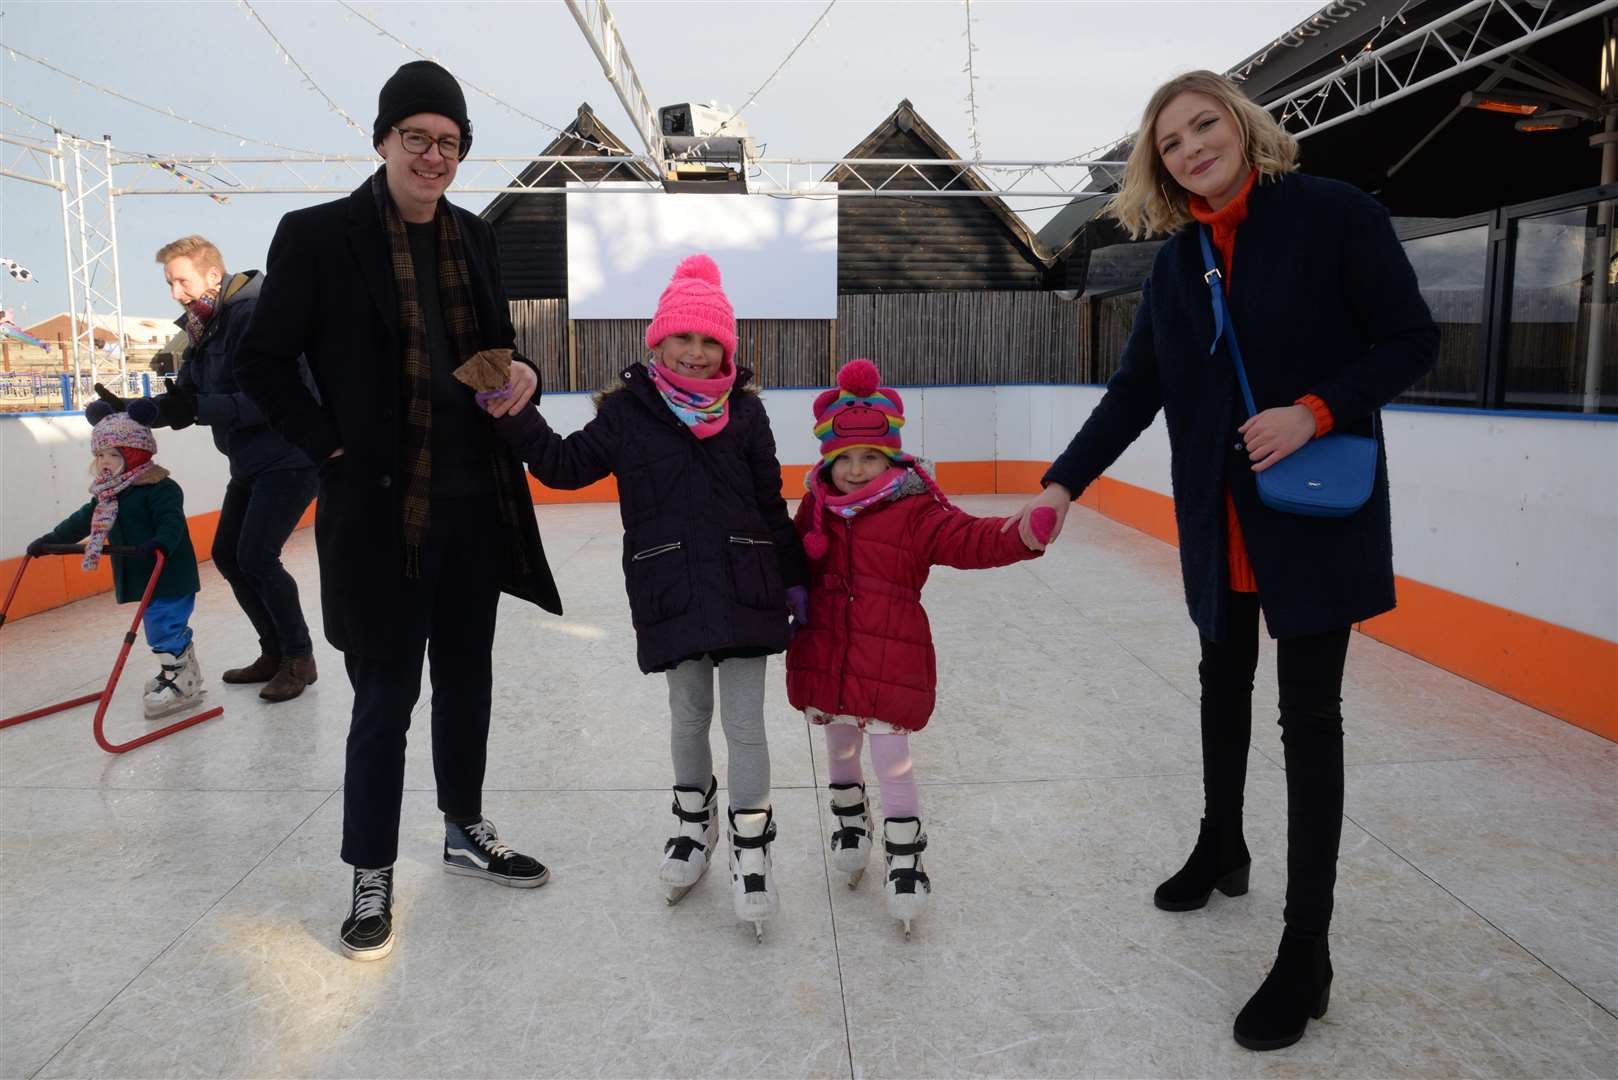 A family enjoys ice skating during last year's WhitSparkle Christmas Celebration in Whitstable Harbour